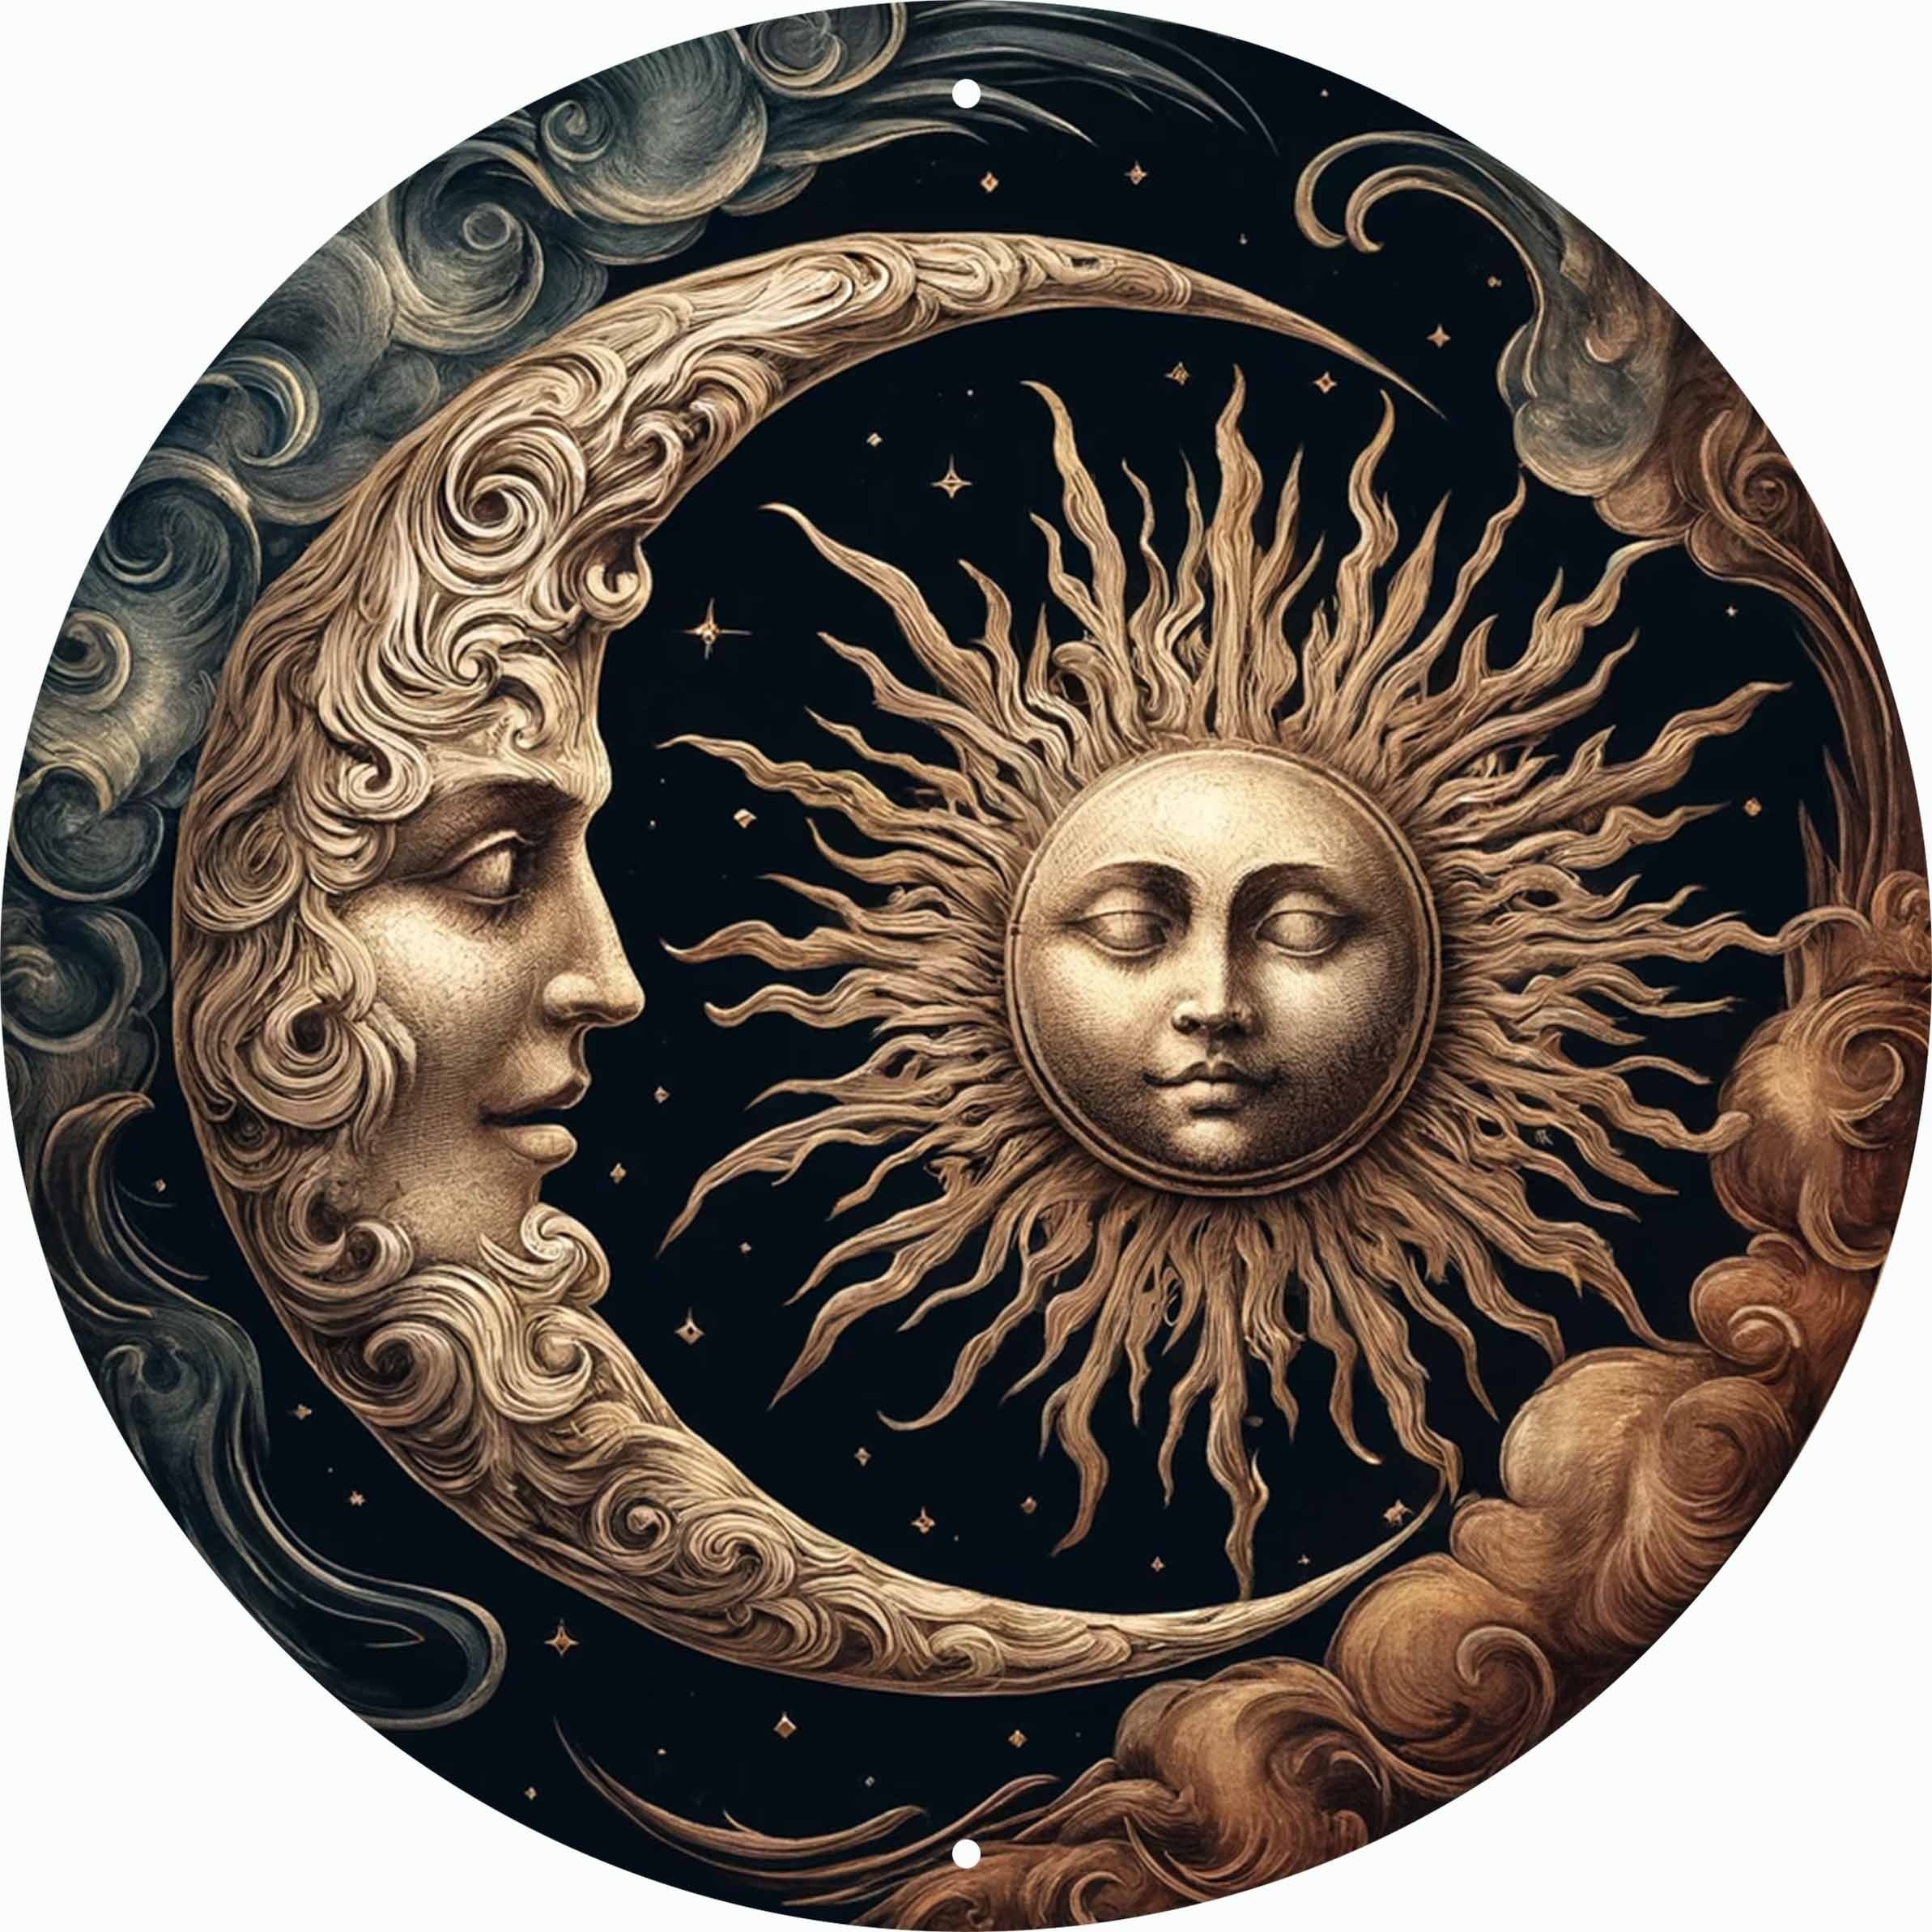 

Sun And Moon Circular Metal Sign Wall Art, 1 Piece Foil Engraved Tin Sign For Home Decor, Indoor/outdoor Use For Living Room, Bedroom, Cafe, Garage Entrance – Durable Metal Material, 20cm Diameter